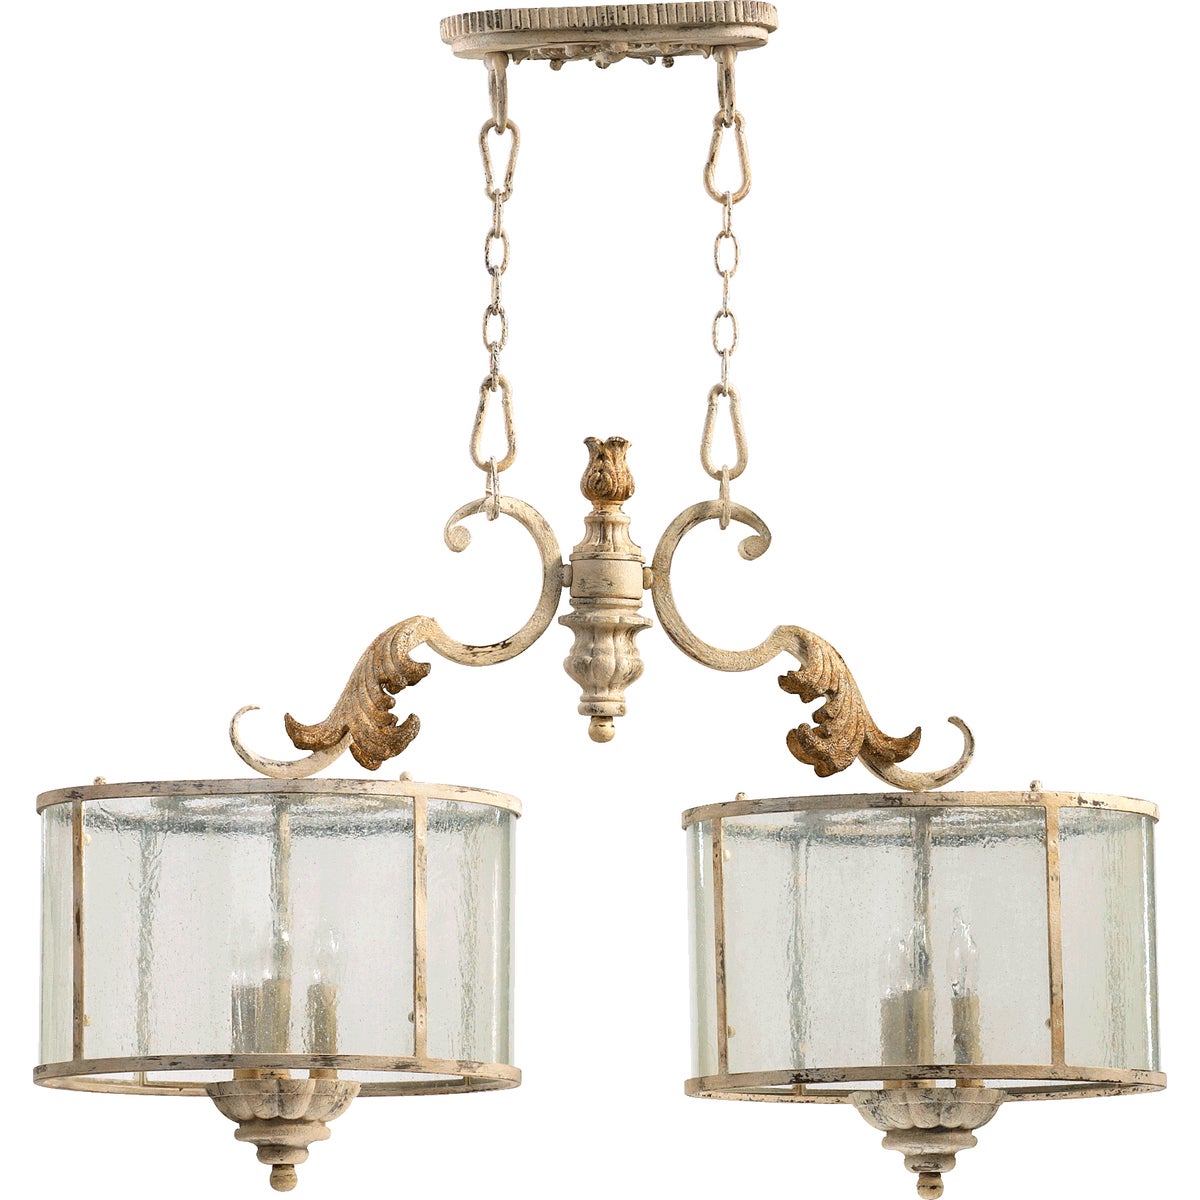 Florence 6 Light Traditional Persian White Linear Pendant